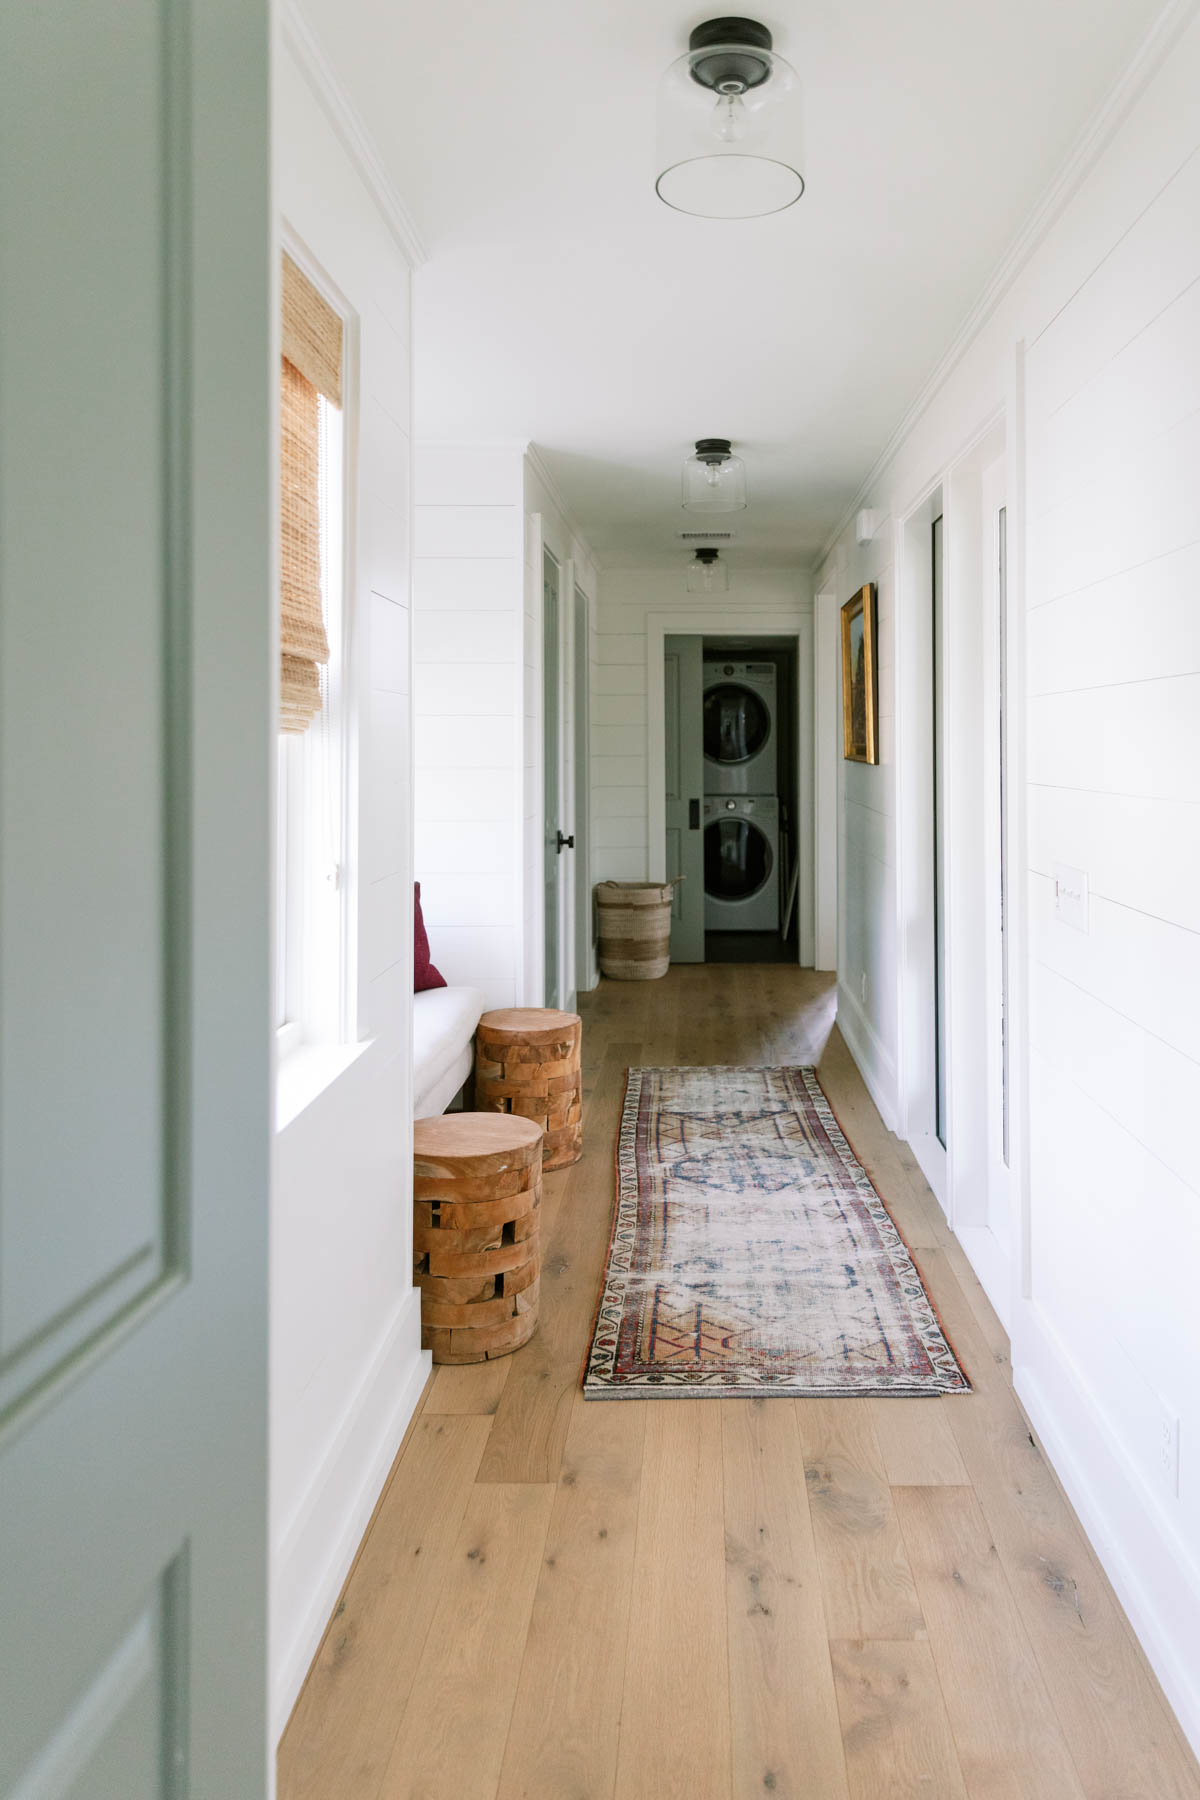 Using rugs to dress up your entryway